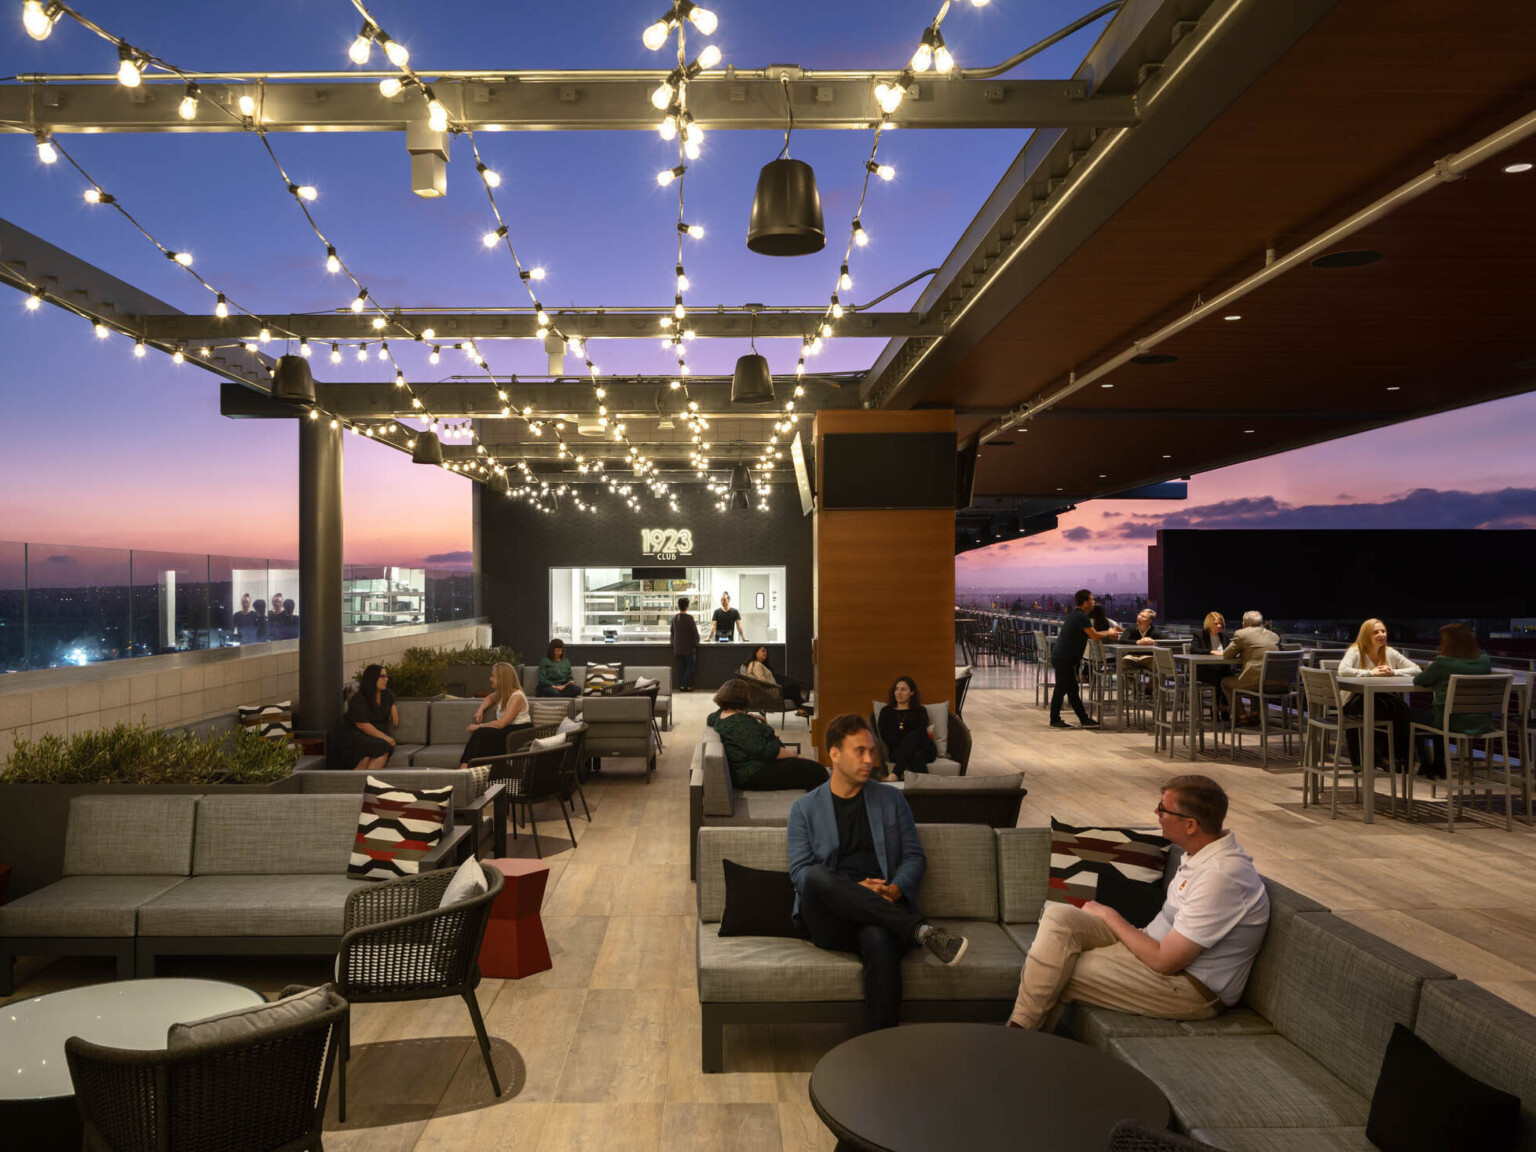 Partially covered rooftop patio with bar labeled 1923 Club. String lights hang from exposed beams at left over lounge seating